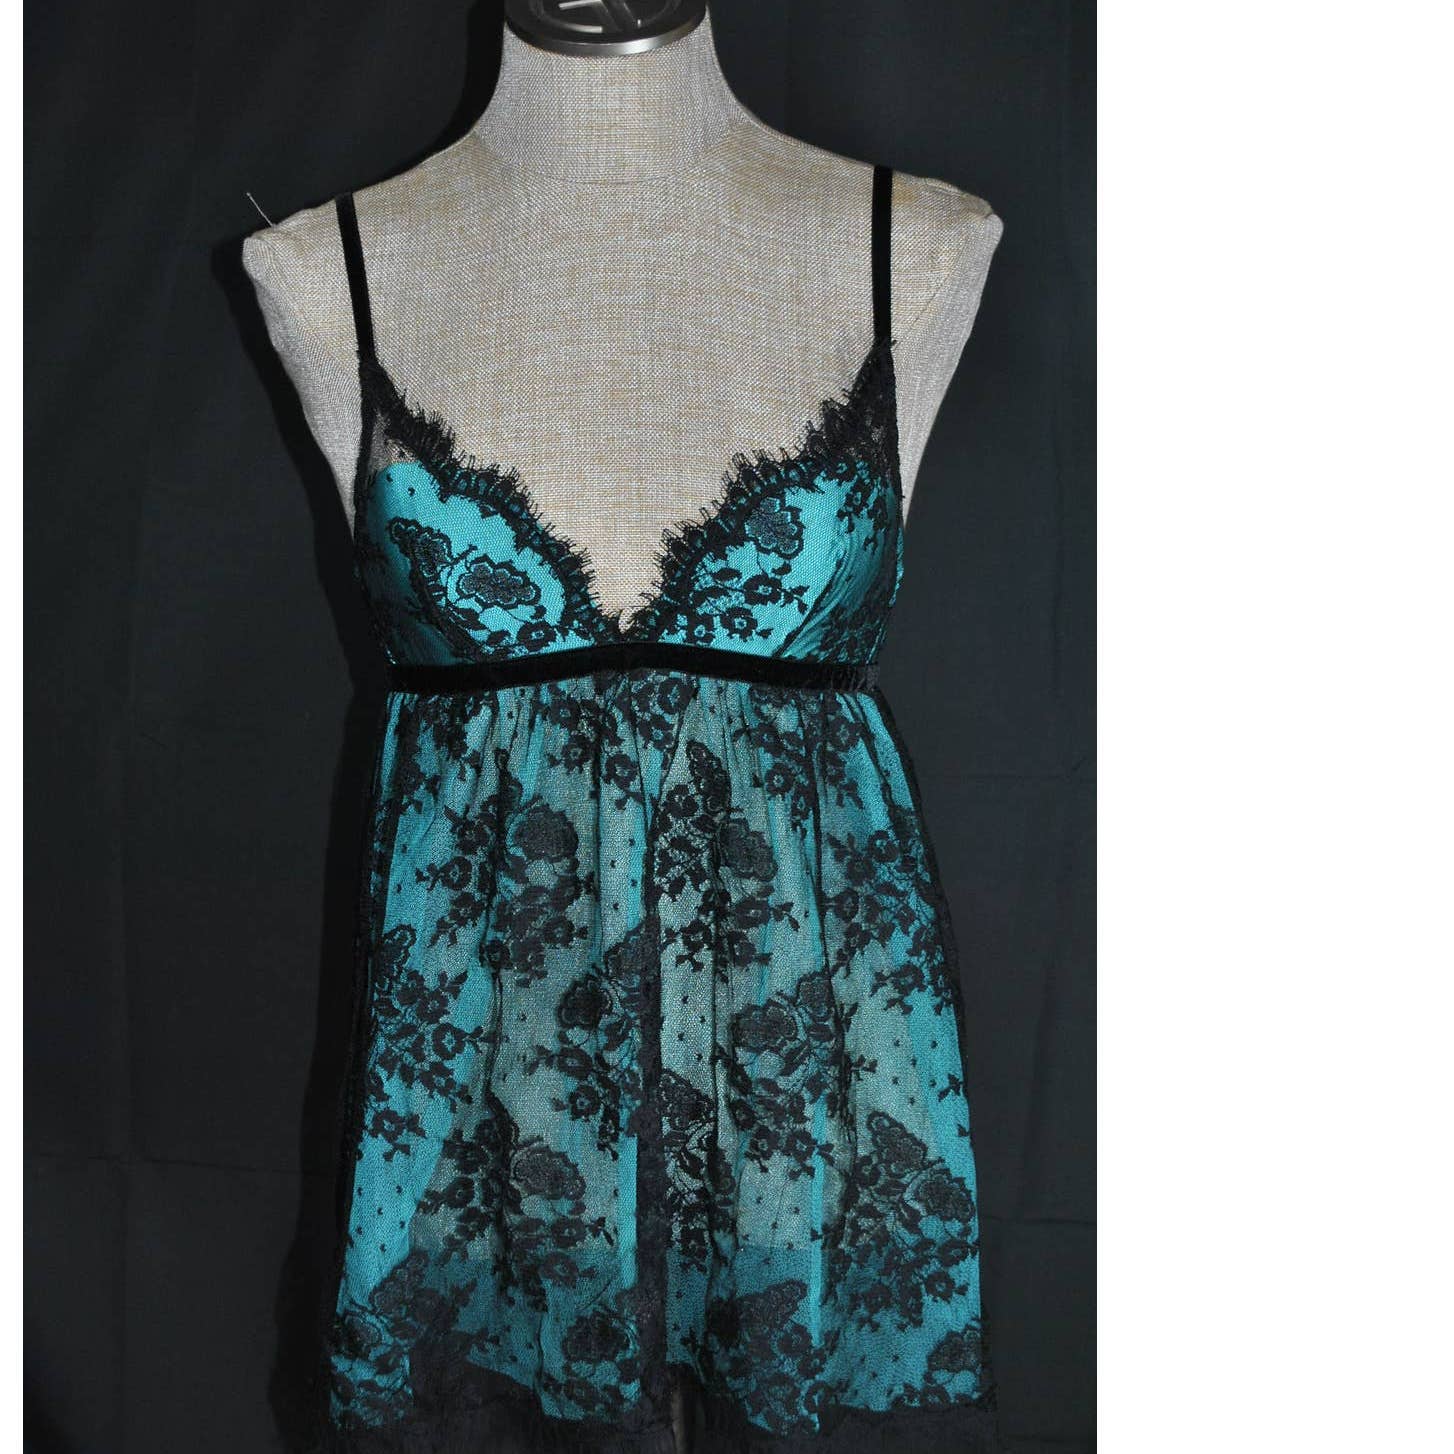 Victoria's Secret Very Sexy Teal Blue Negligee - S